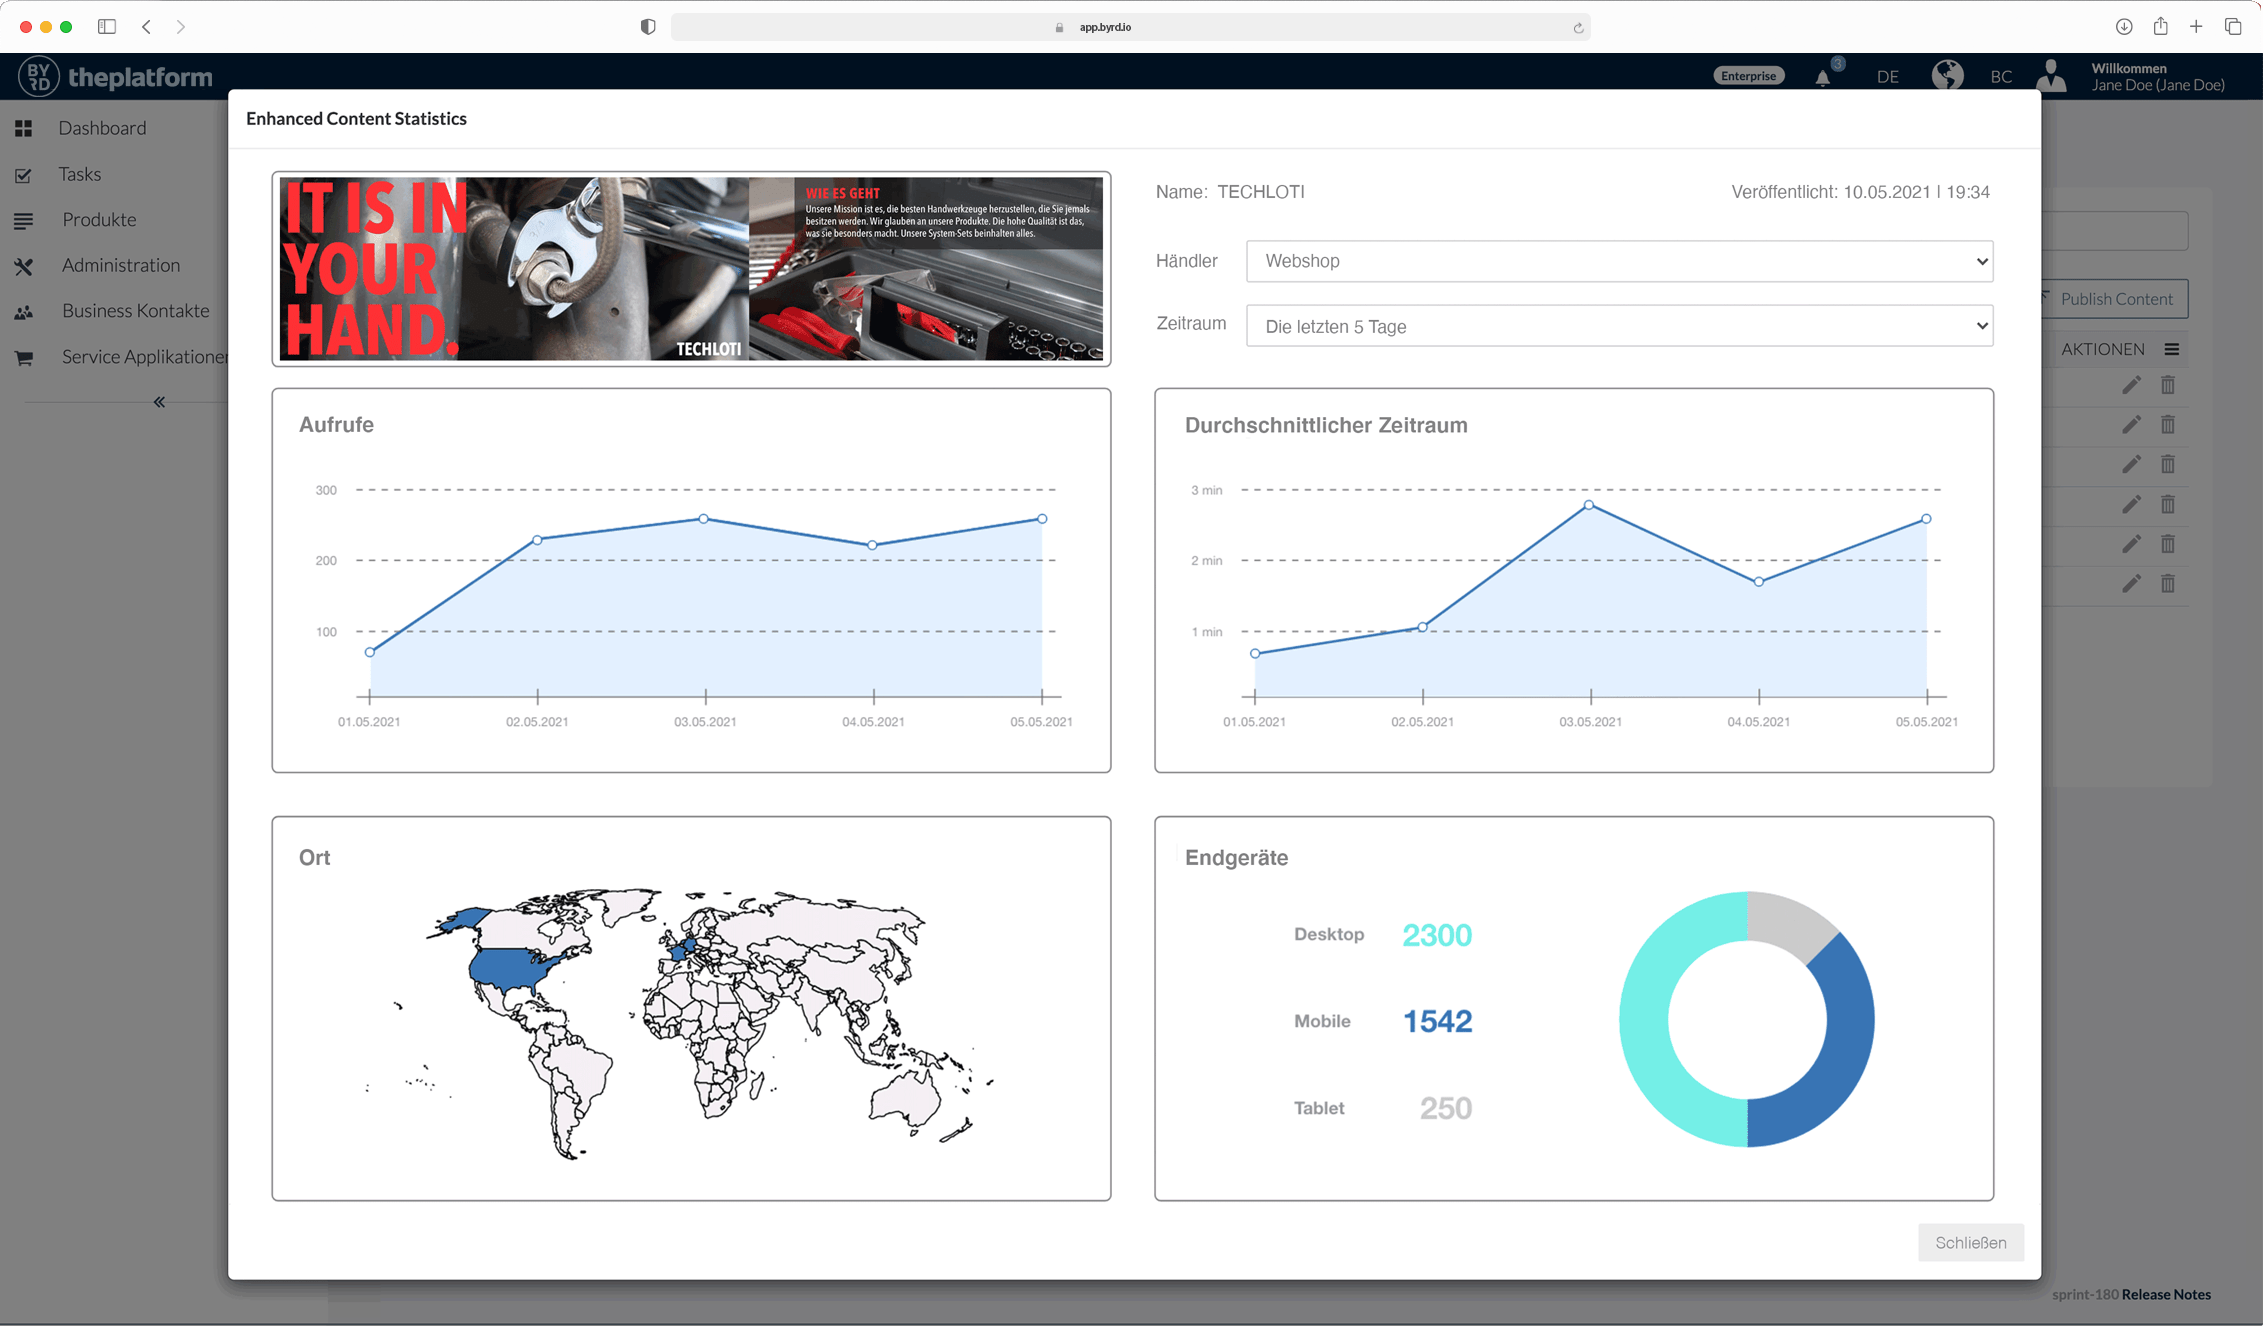 Full control over performance thanks to real-time analytics